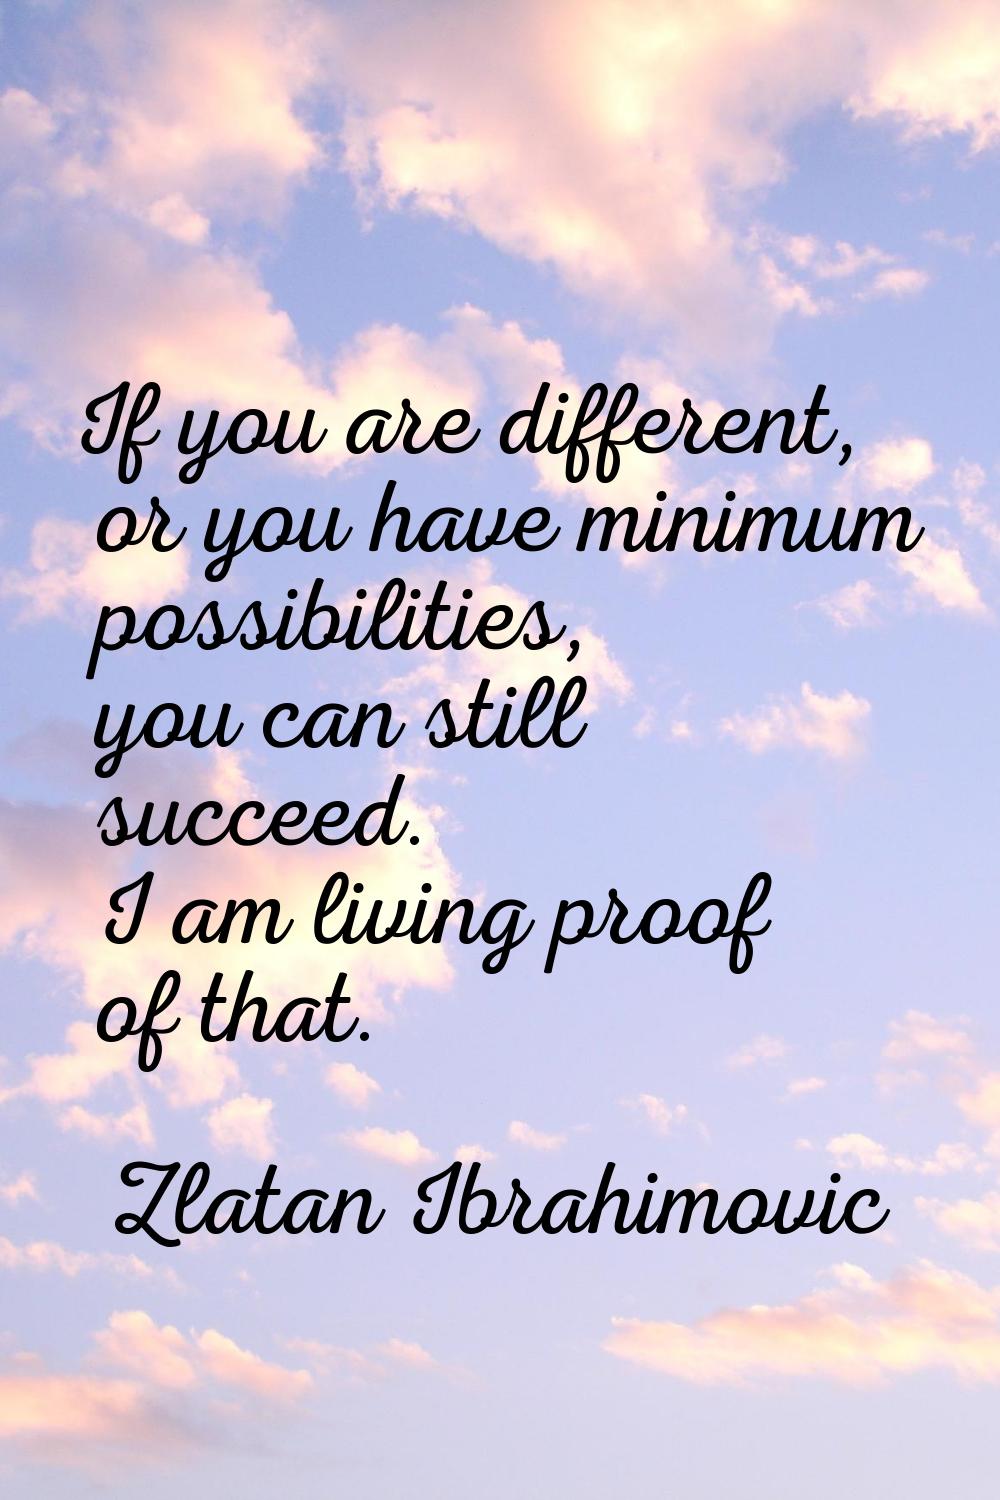 If you are different, or you have minimum possibilities, you can still succeed. I am living proof o